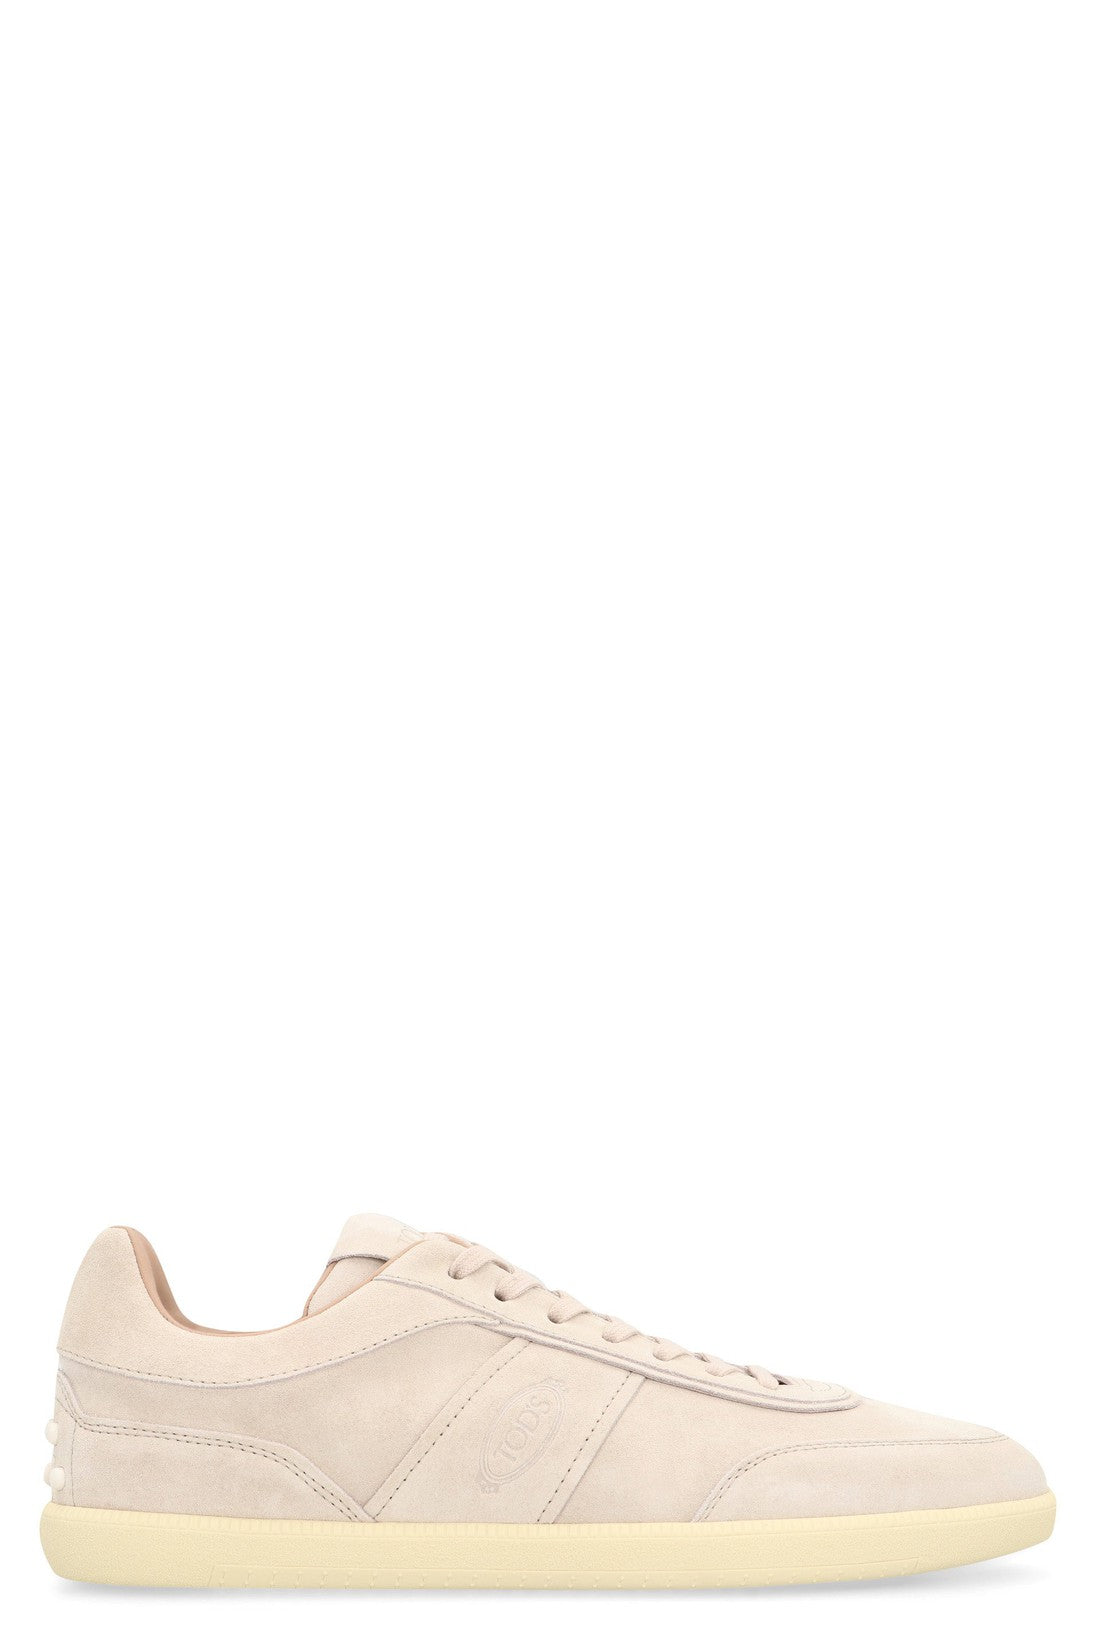 Tod's-OUTLET-SALE-Tabs leather low sneakers-ARCHIVIST